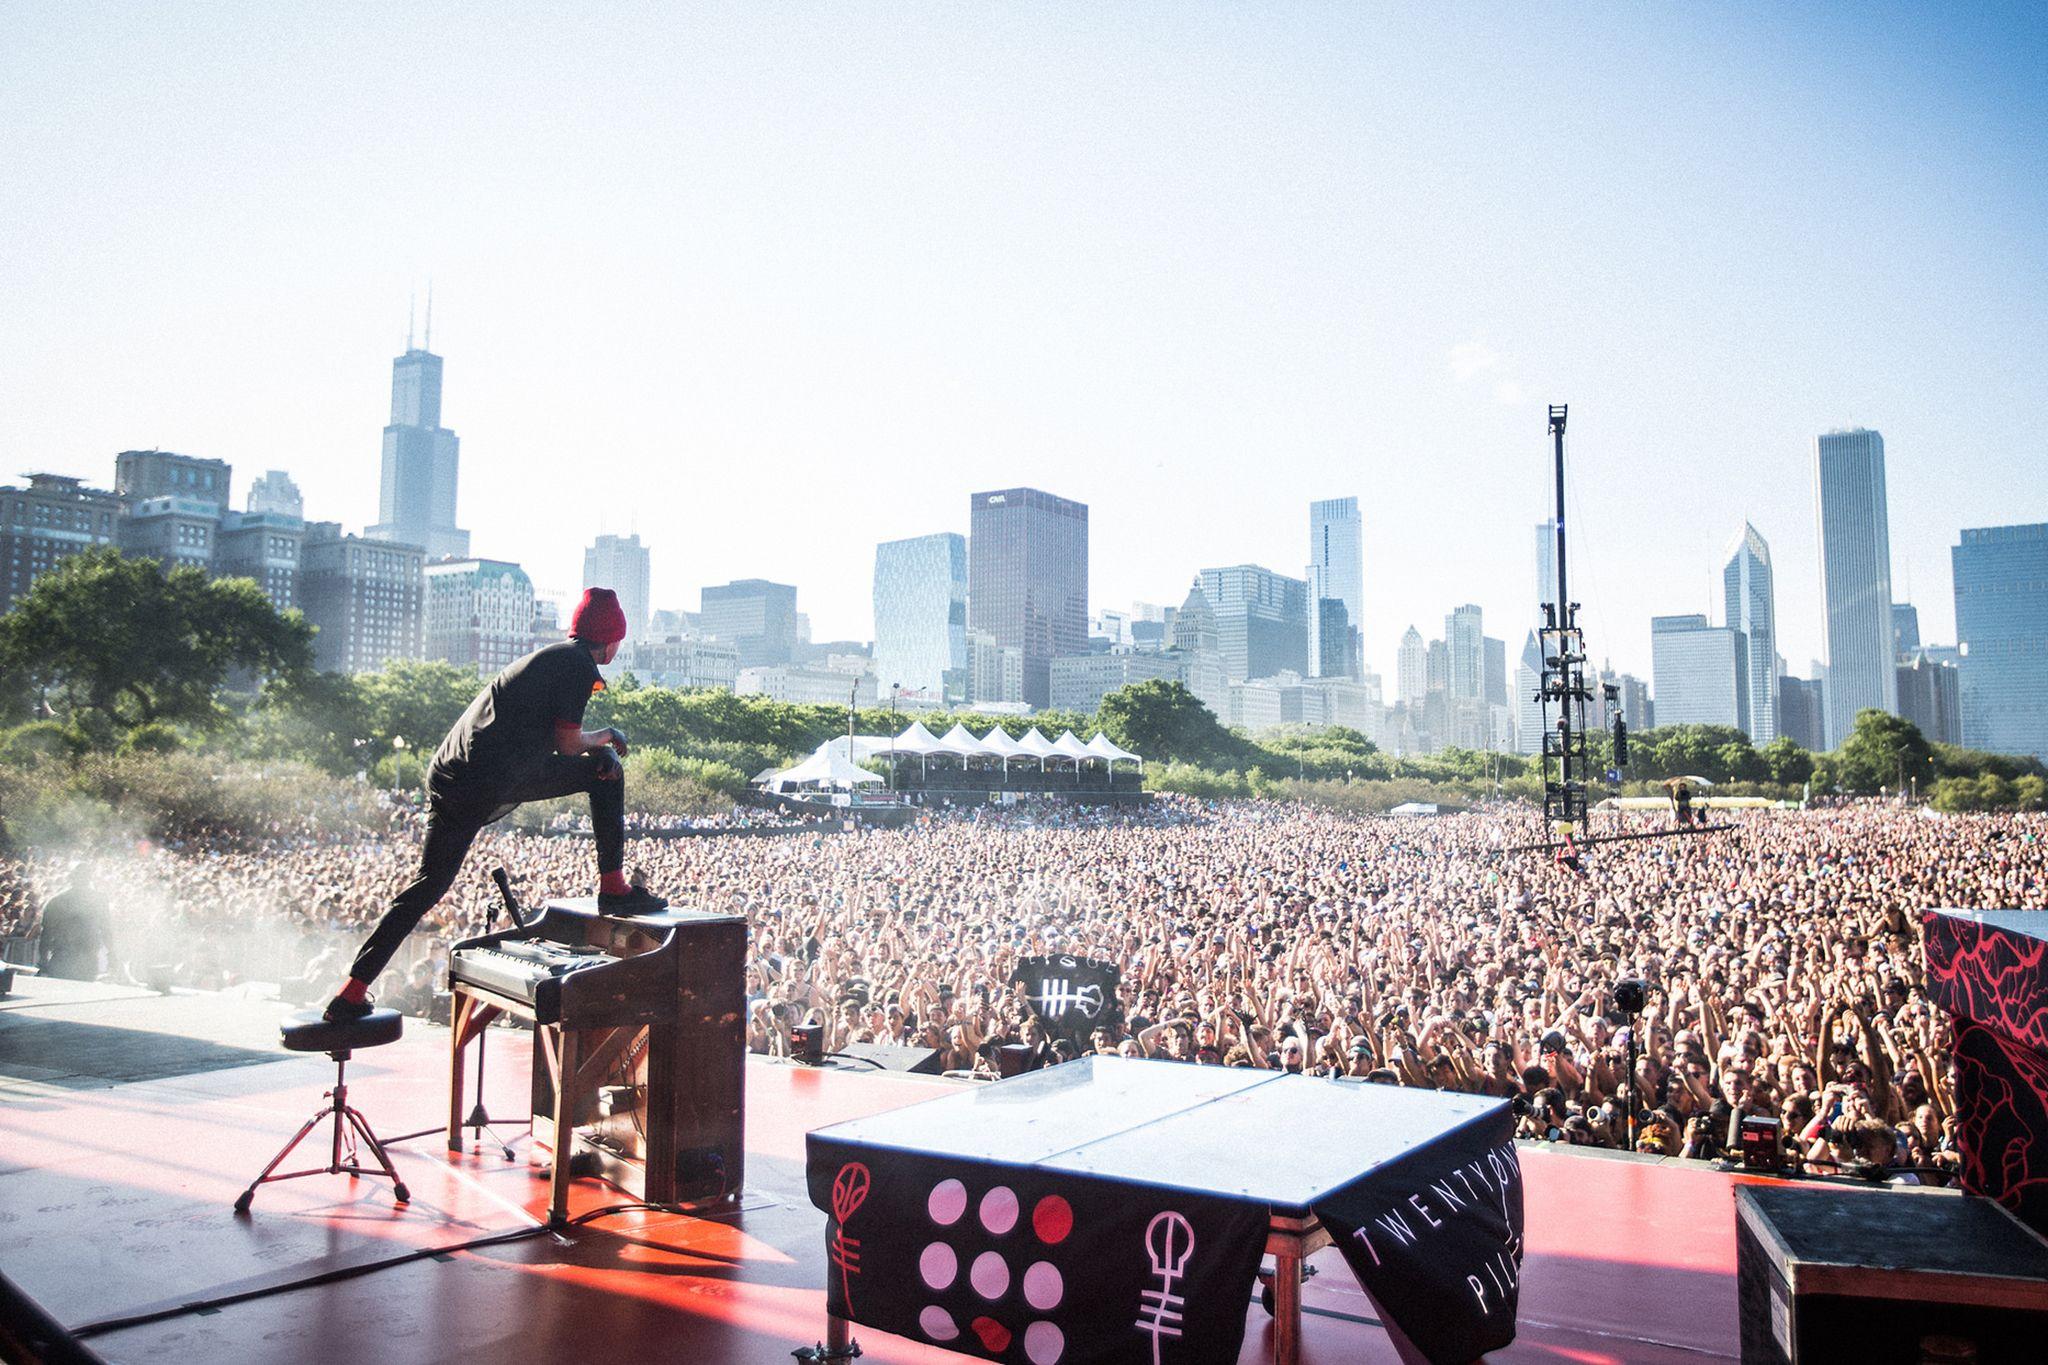 Looking back at 25 years of Lollapalooza history